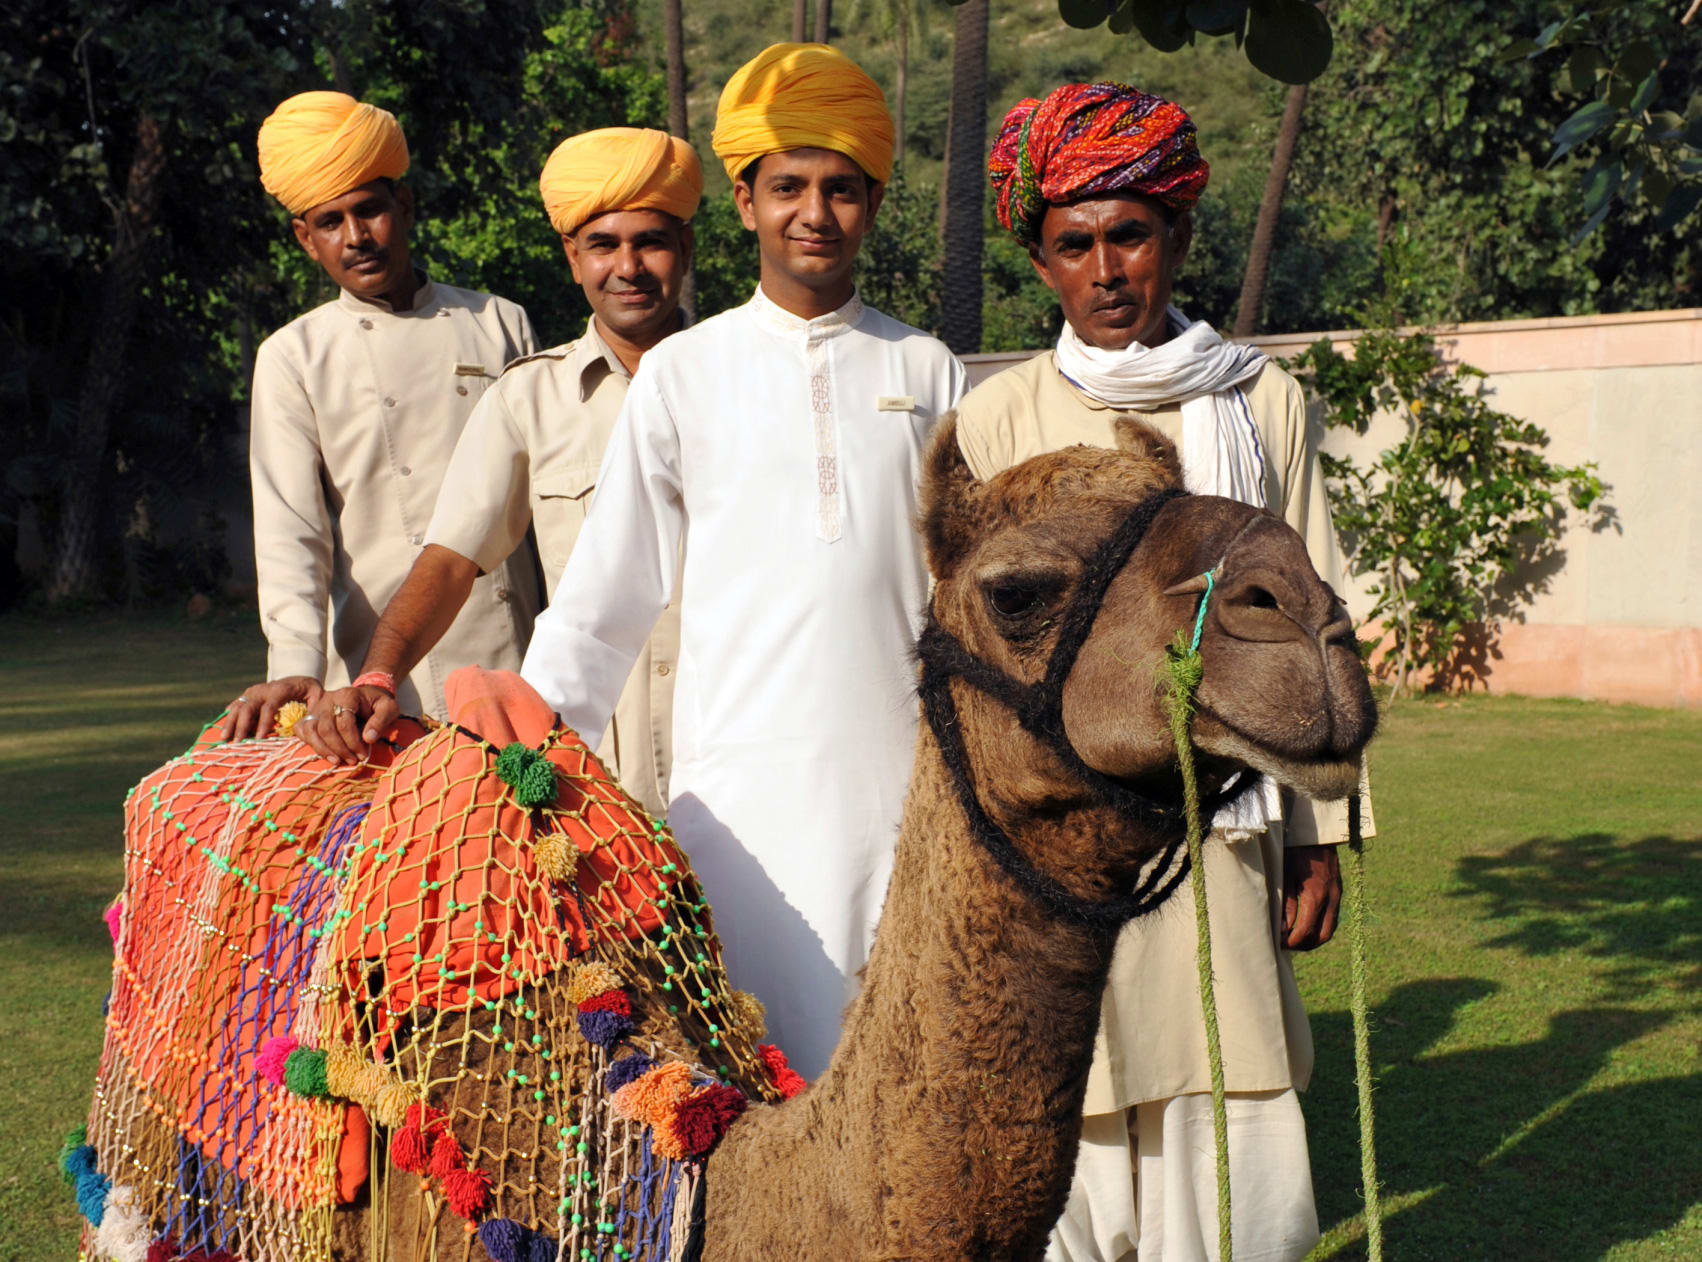 four men with turbans, sitting camel